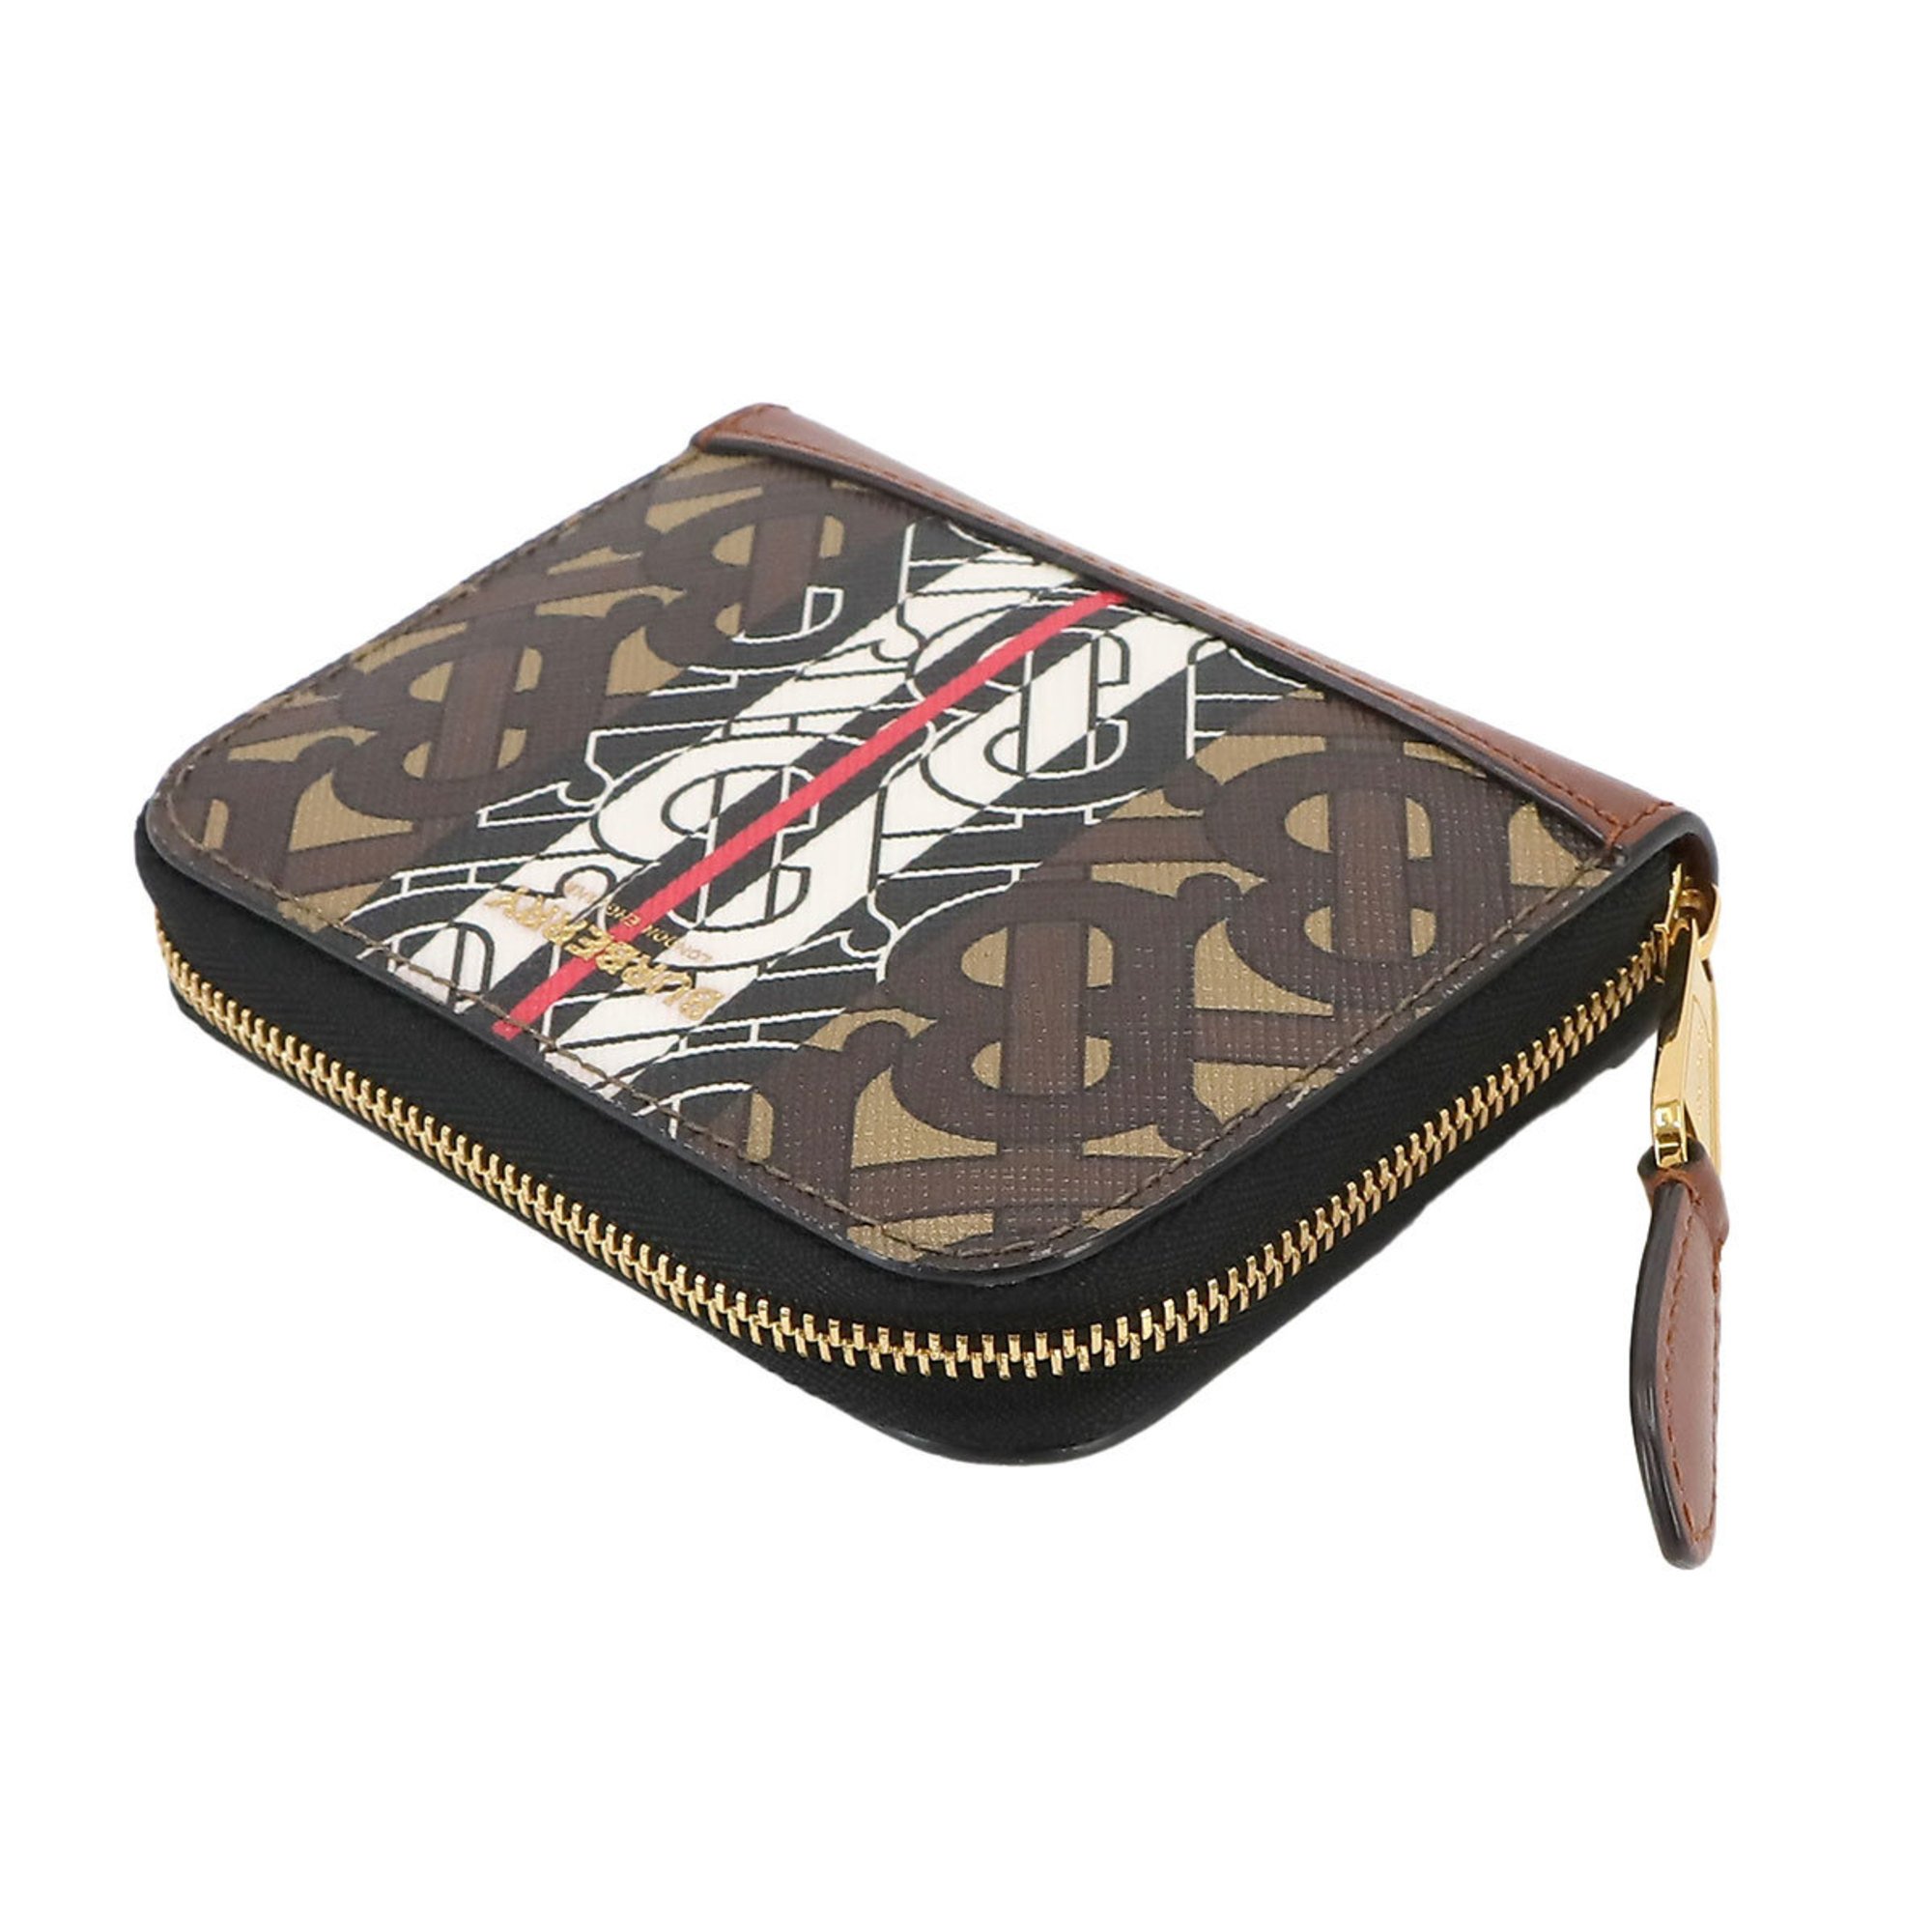 Burberry Monogram Stripe Round Wallet/Coin Case Coin Purse Leather Brown Gold Metal Fittings